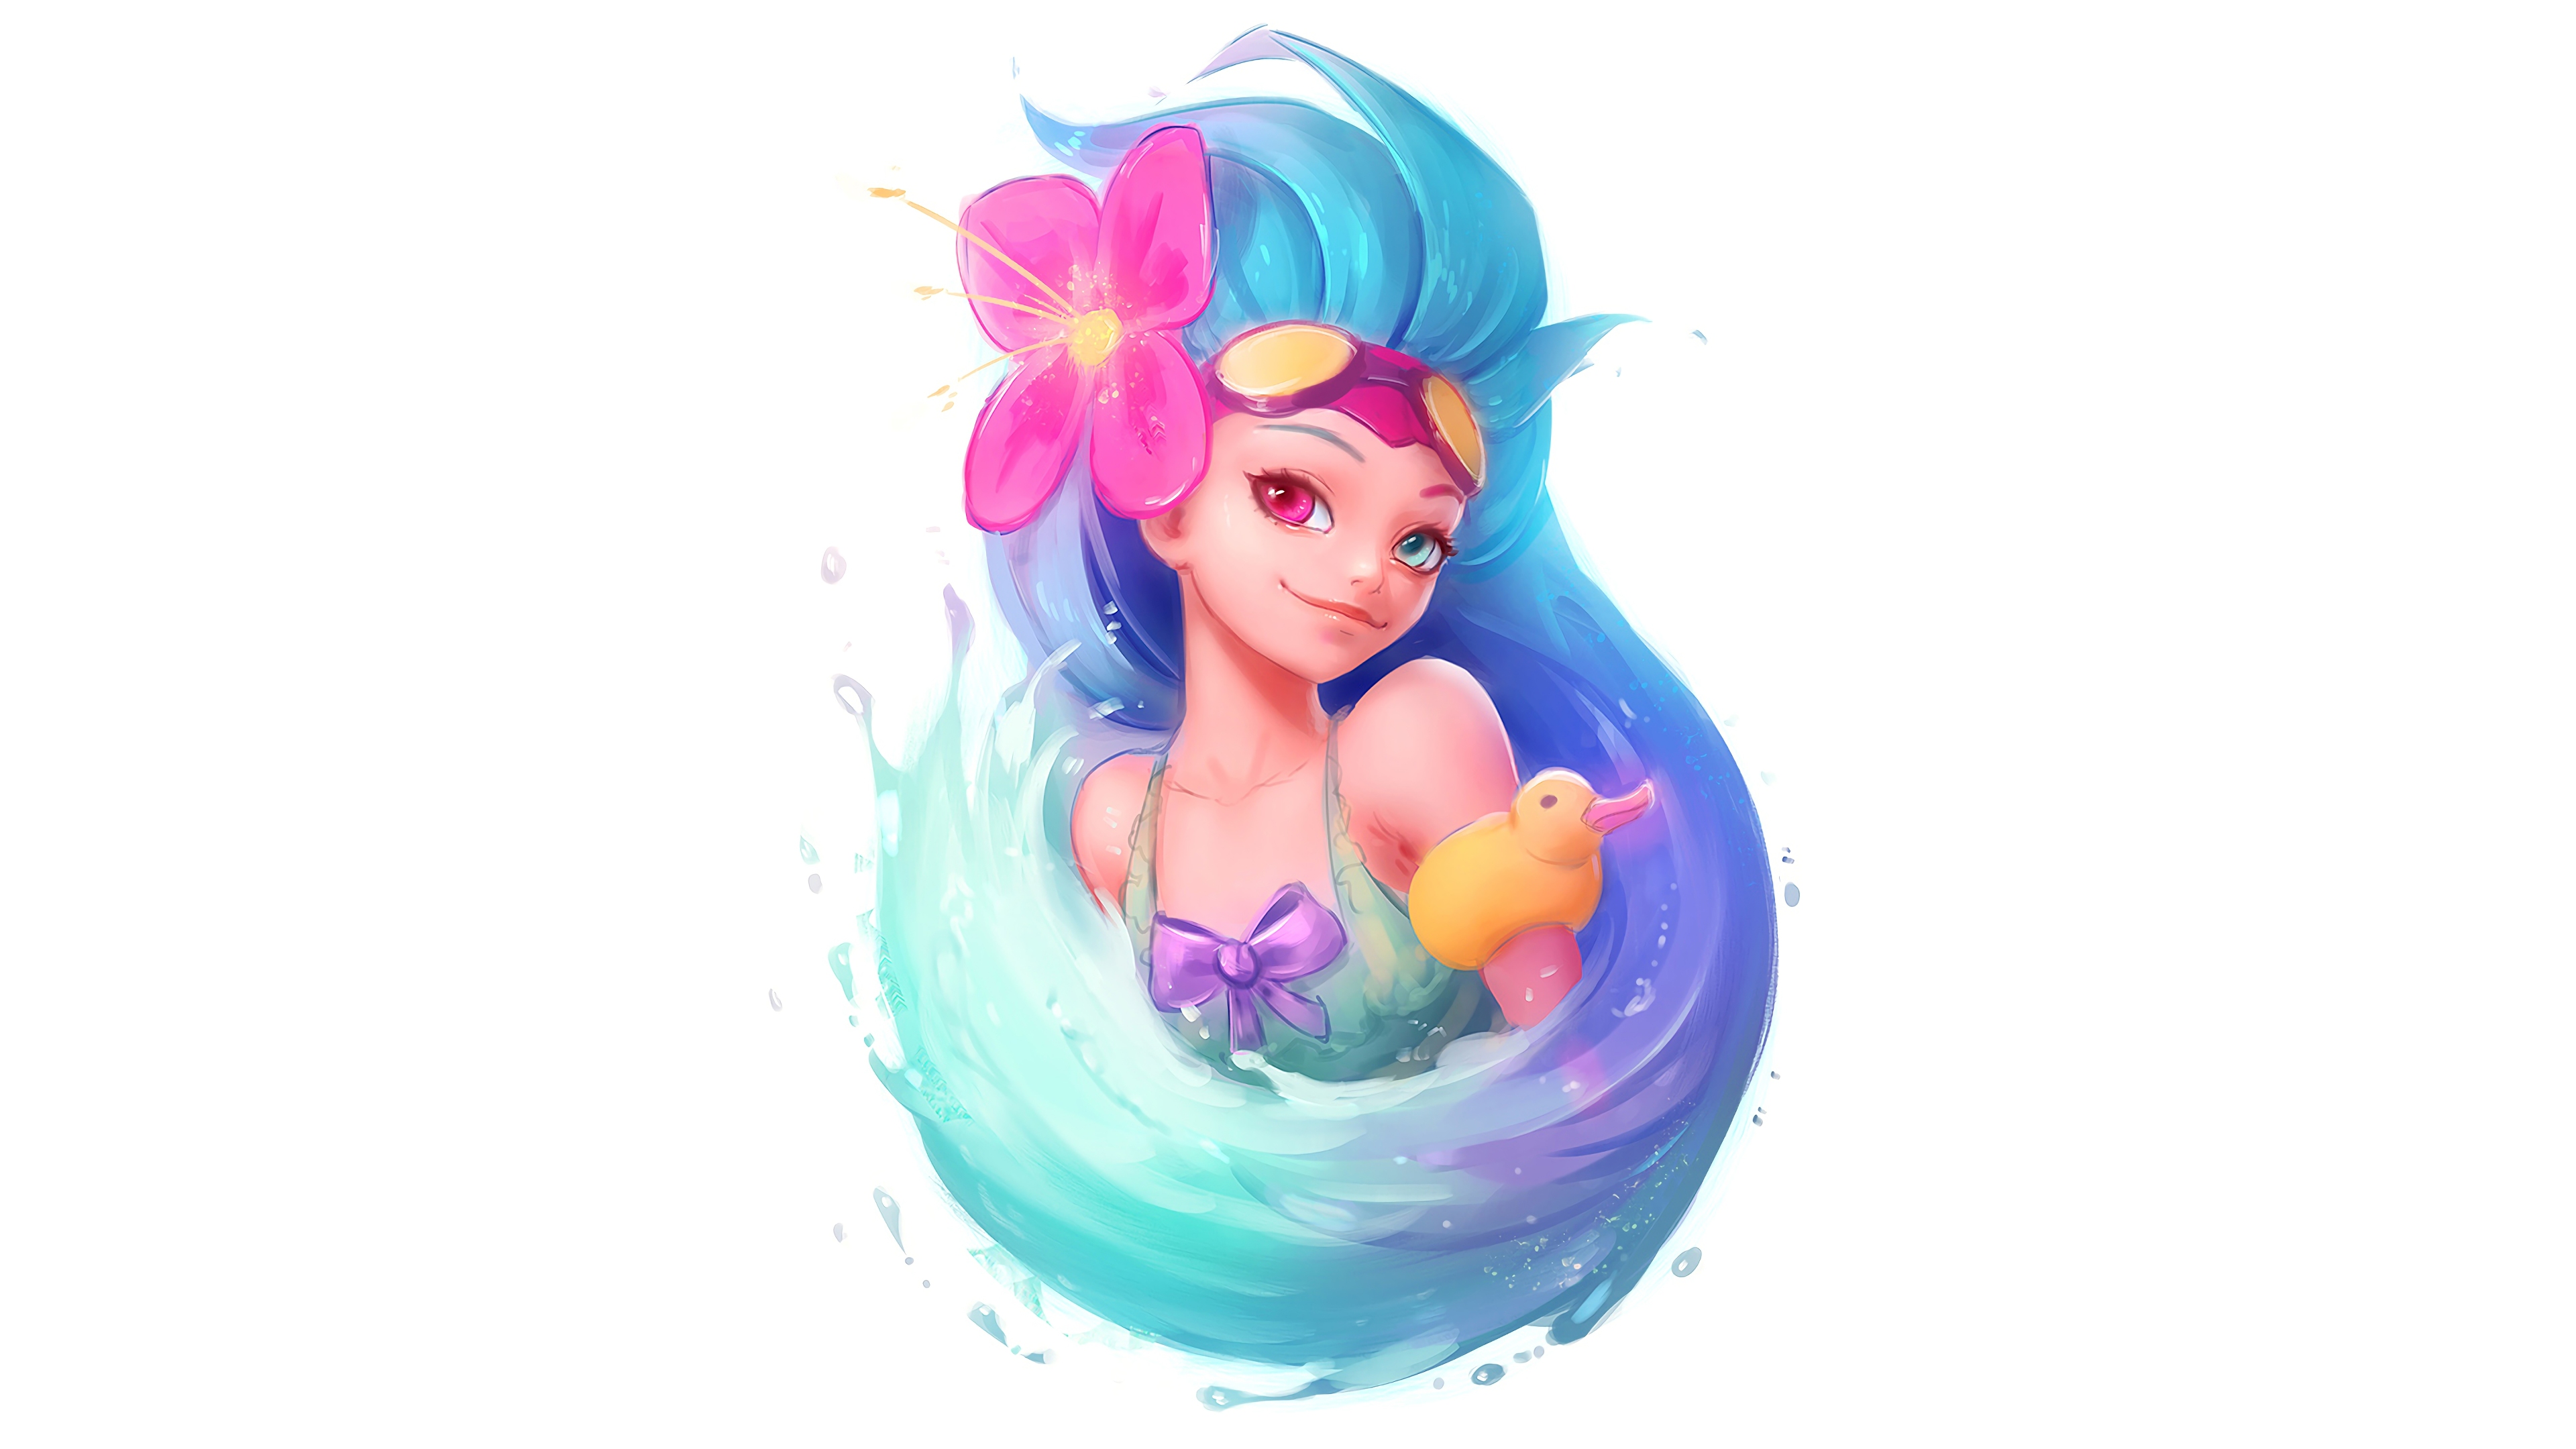 General 3840x2160 video games League of Legends Zoe (League of Legends) pool party simple background white background duck